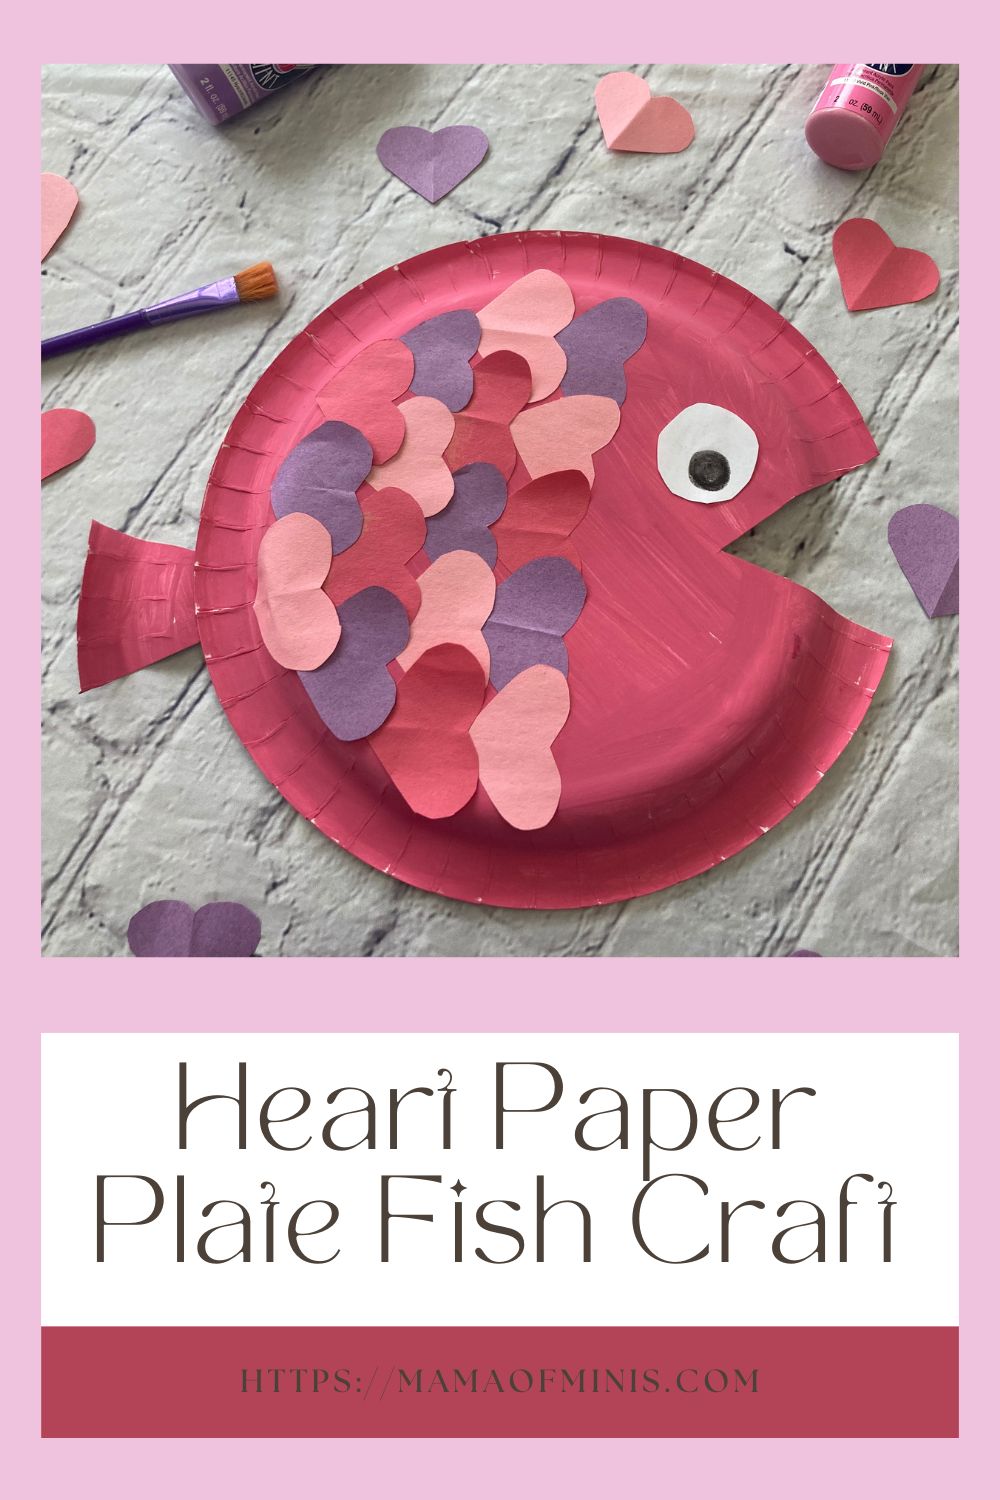 Heart Paper Plate Fish Craft